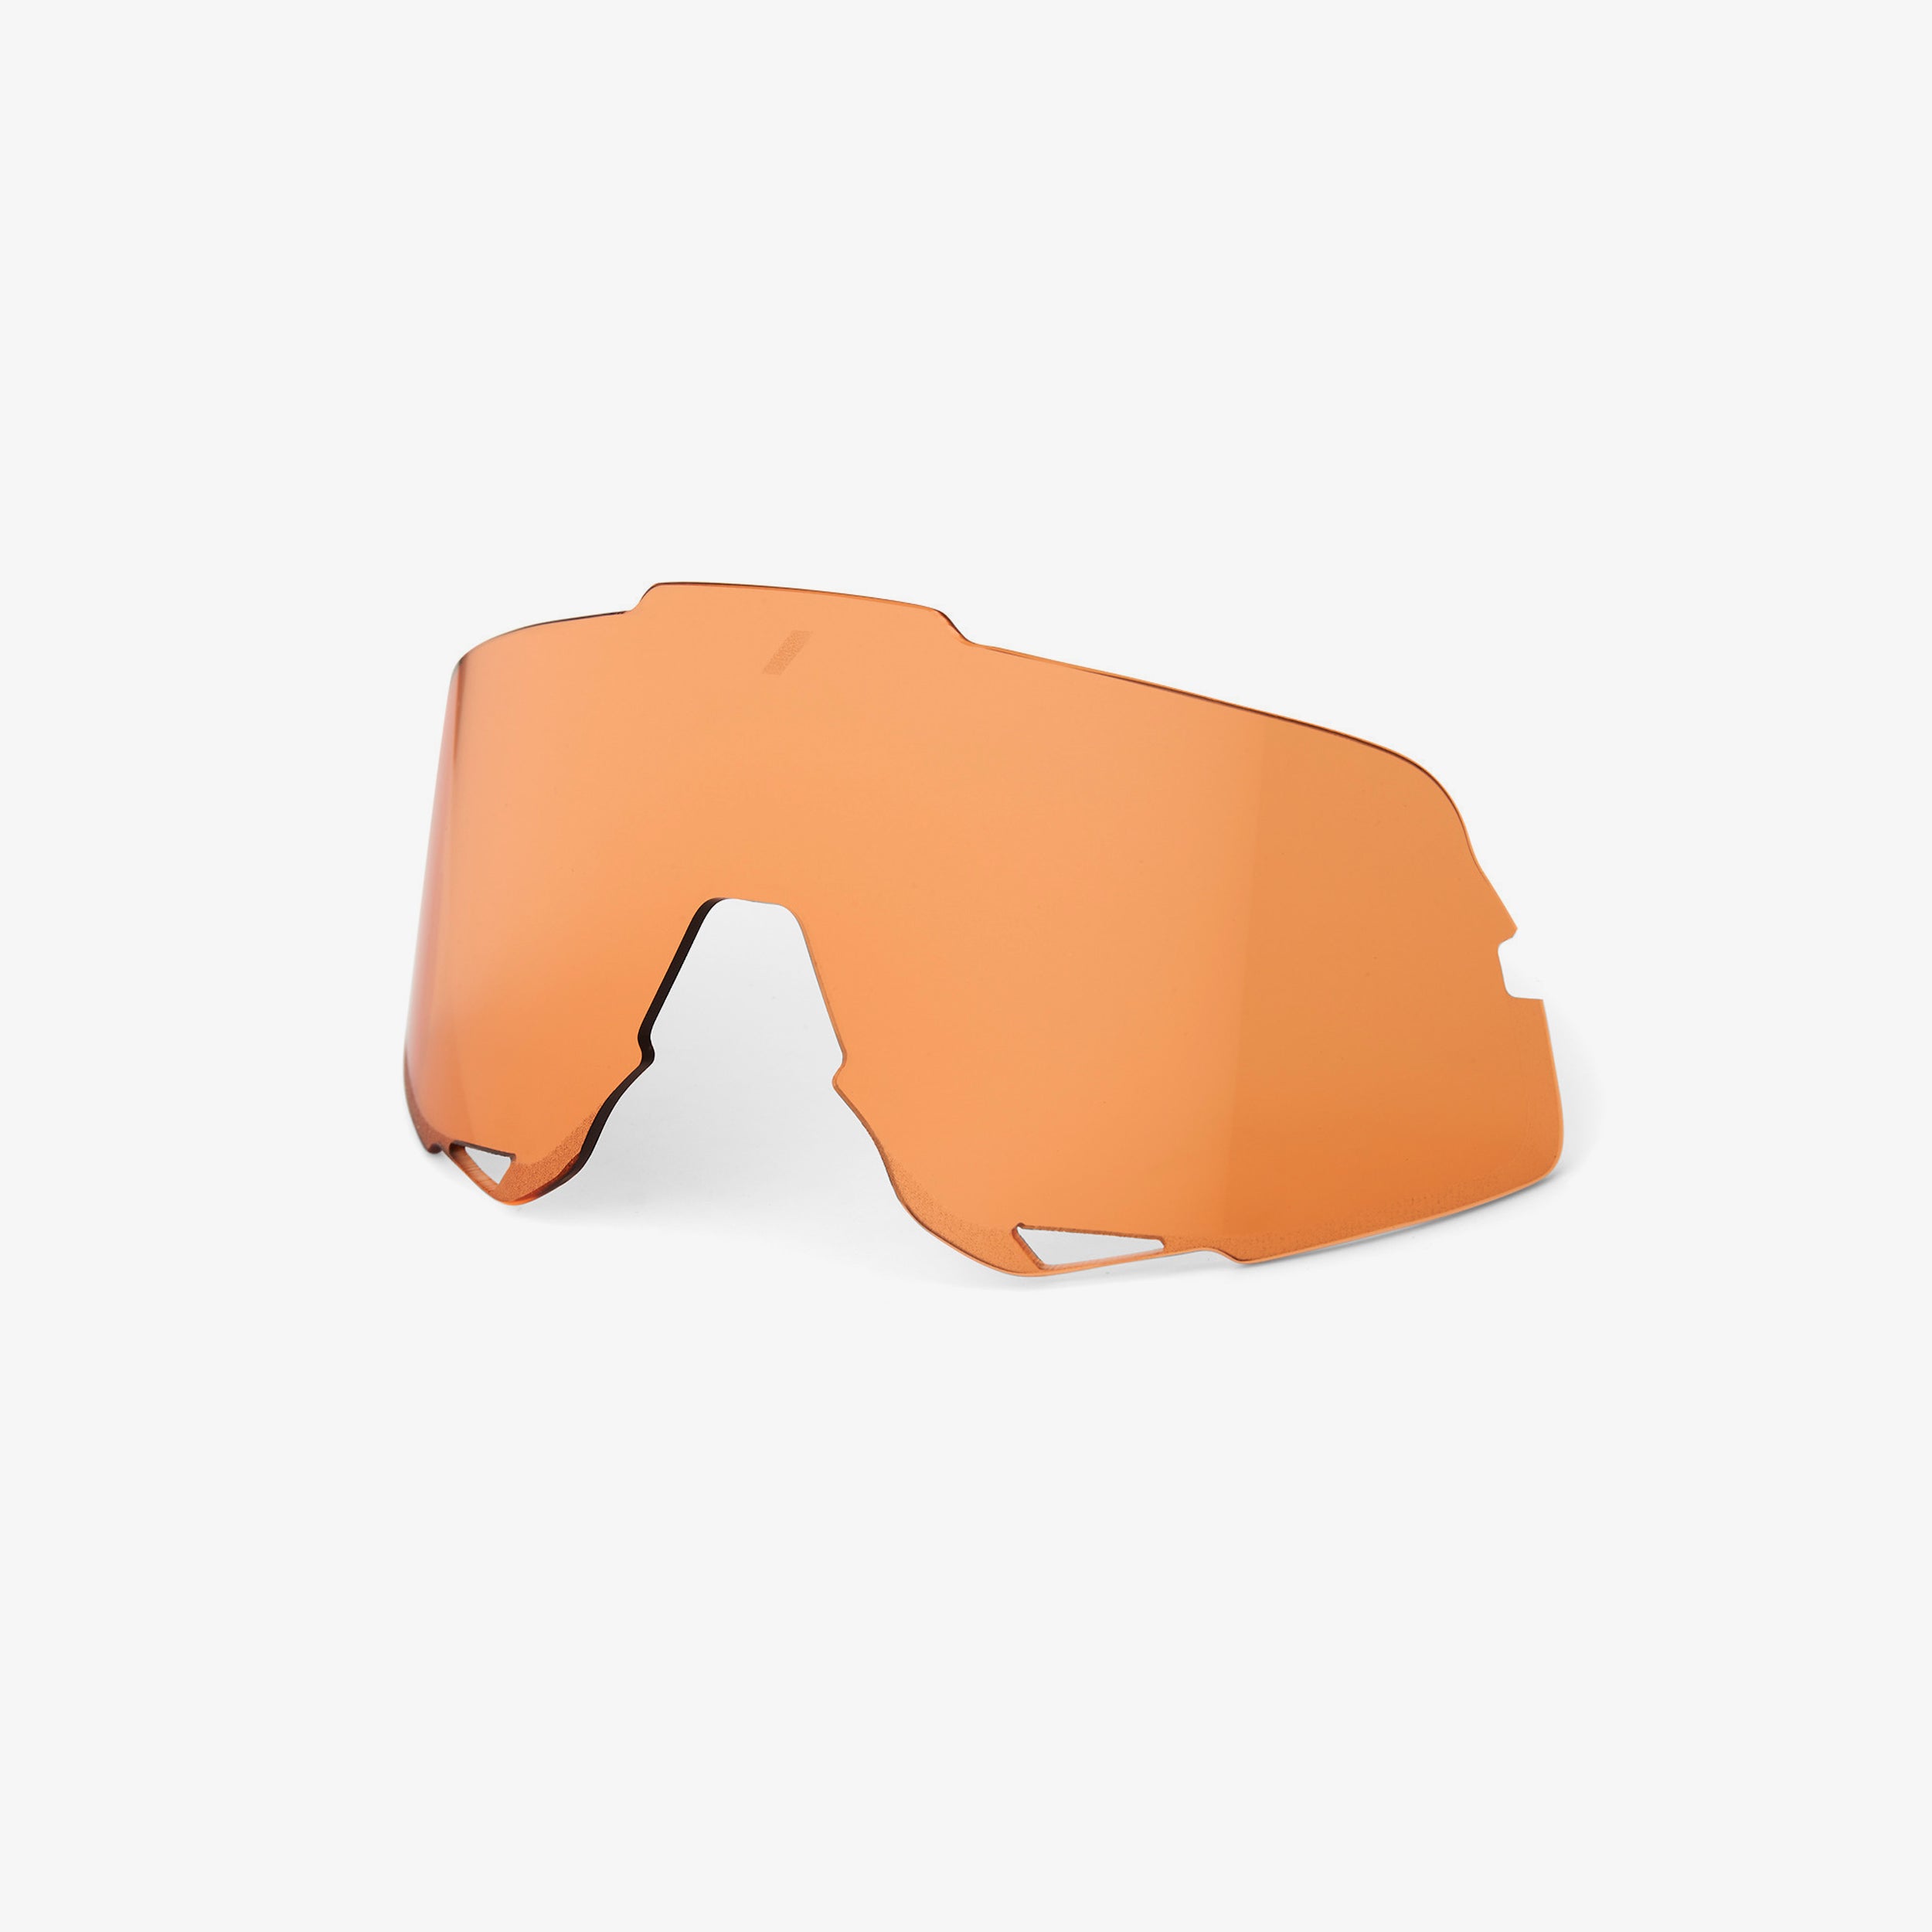 GLENDALE® Replacement Lens - Persimmon